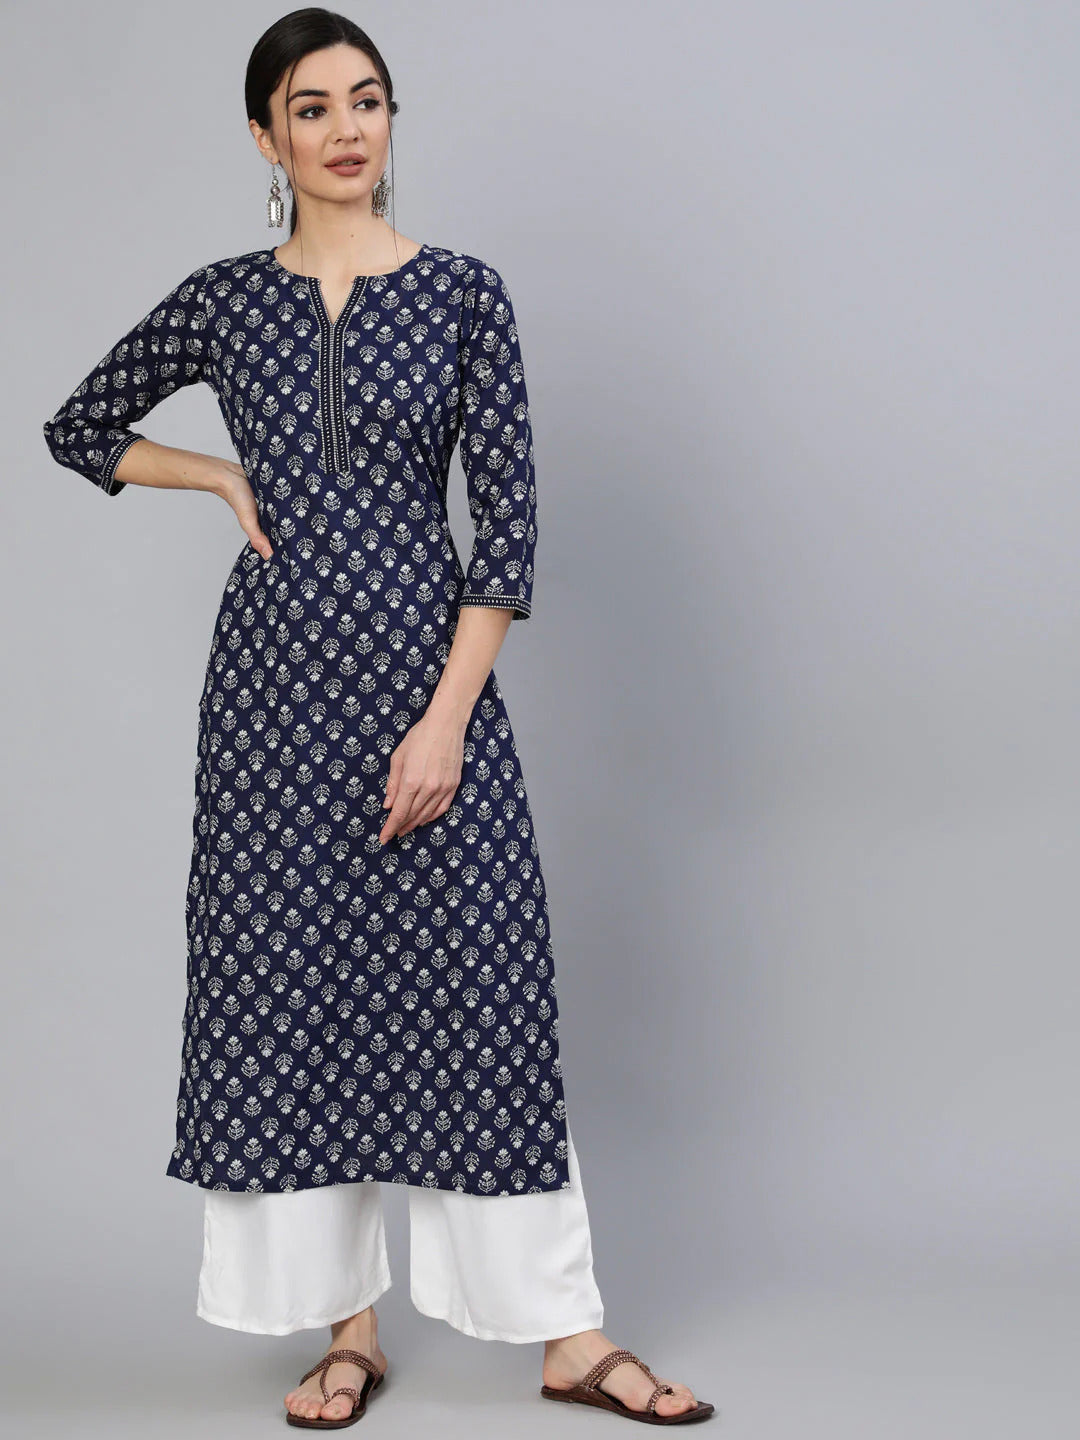 Navy Blue  Ethnic Printed Cotton Kurti Top(Top Only)